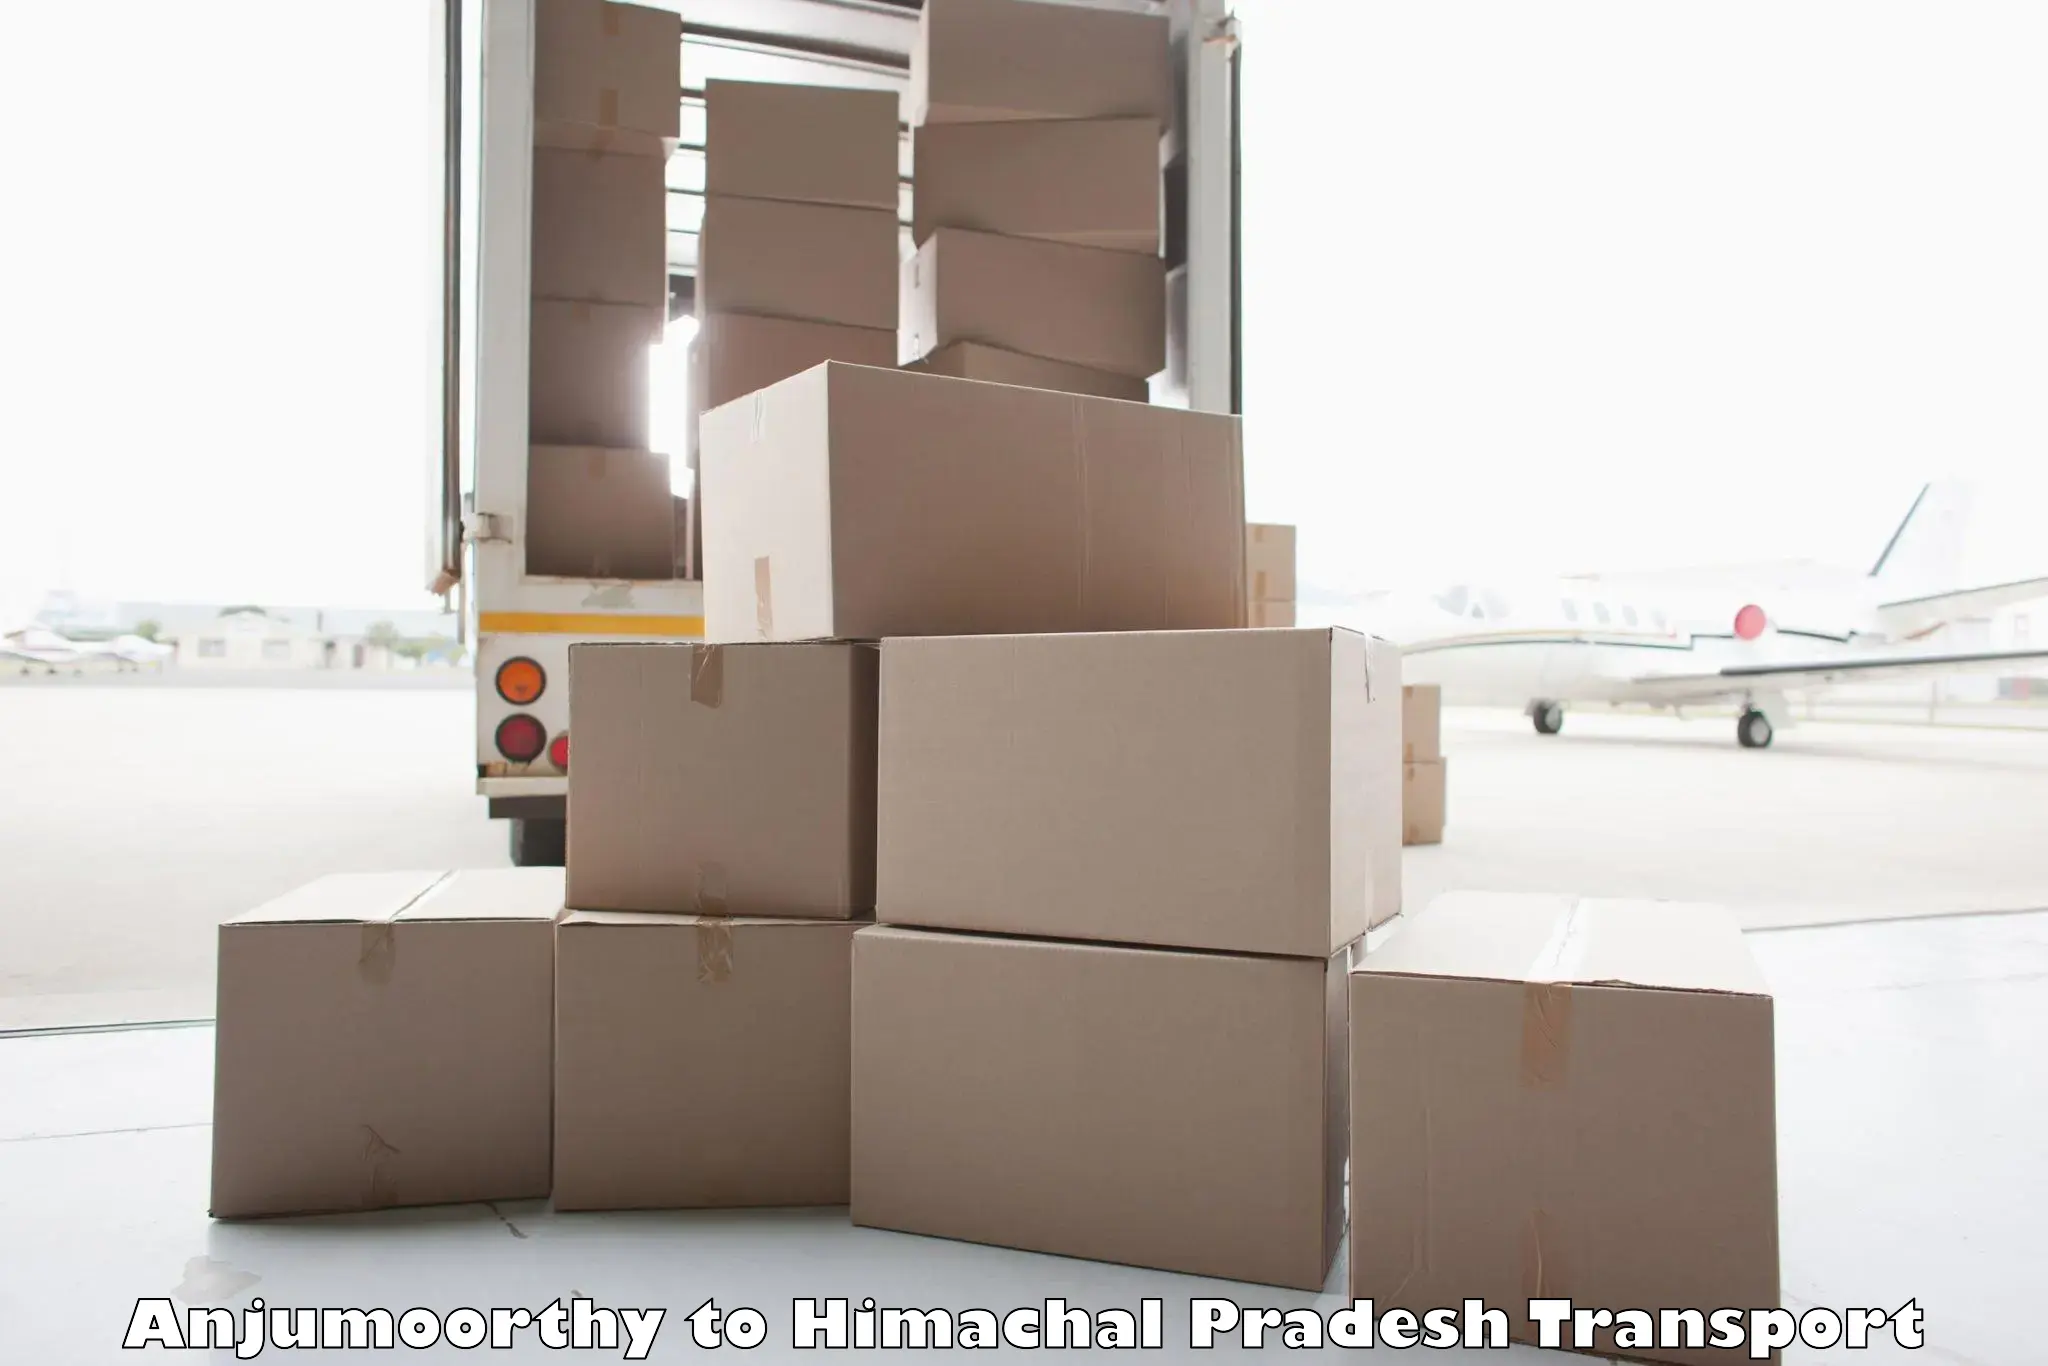 Parcel transport services Anjumoorthy to YS Parmar University of Horticulture and Forestry Solan